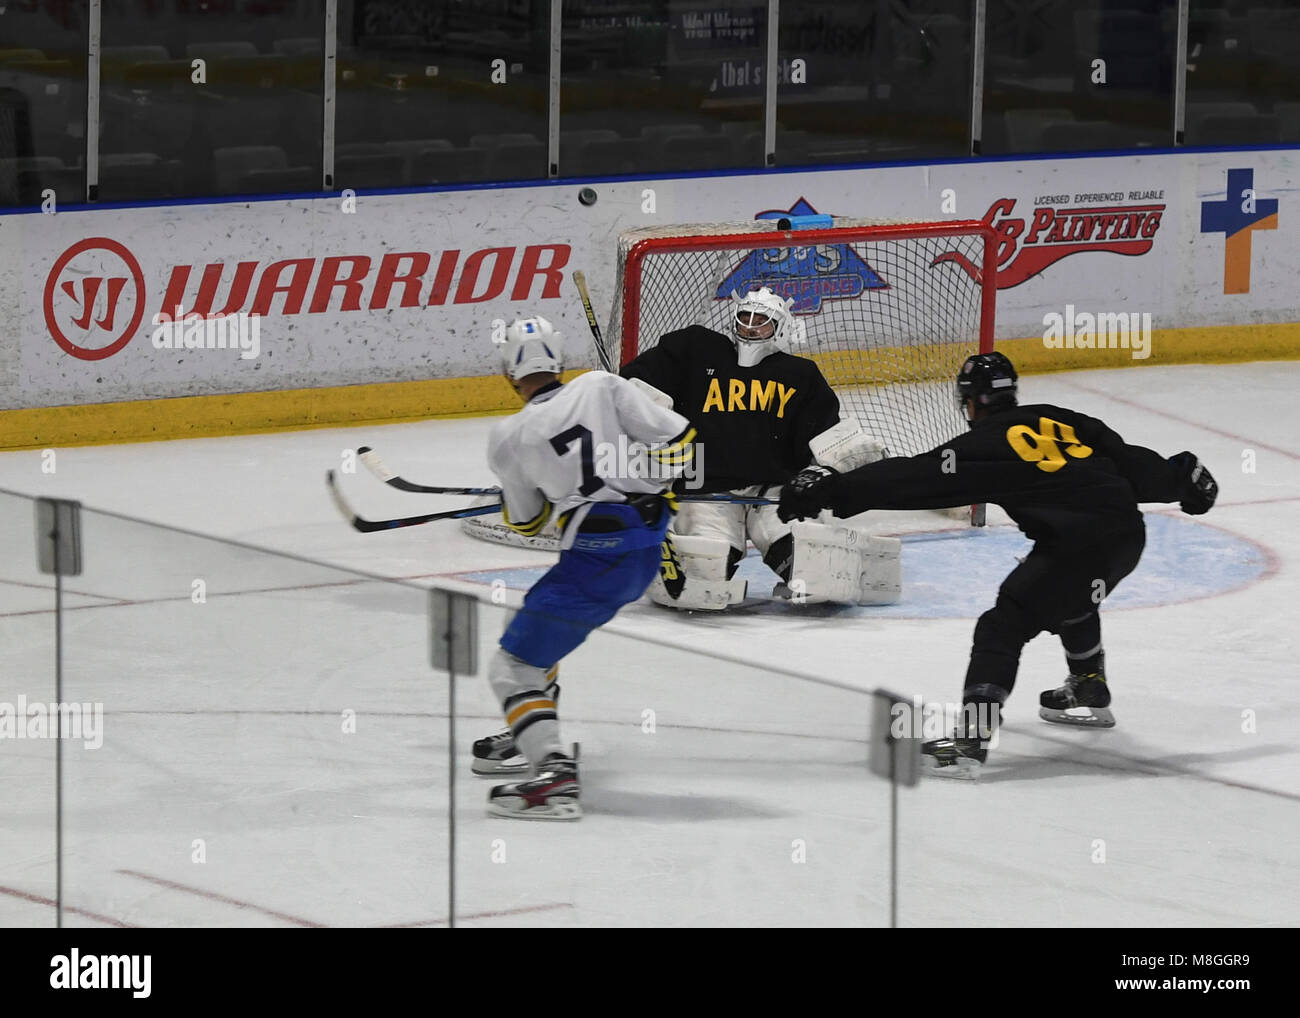 EVERETT, Wash. (March 4, 2018) Sailors assigned to the aircraft carrier USS Nimitz (CVN 68) play on an all-Navy hockey team in the Xfinity Arena against U.S. Army Soldiers, March 4, 2018.  Navy won the 3rd meeting 7-5, picking up their first win of the series. The annual game is a morale, welfare and recreation sponsored event and pits Sailors against Sailors and Marines from Navy Region Northwest. (U.S. Navy photo by Mass Communication Specialist 3rd Class Cody M. Deccio) Stock Photo